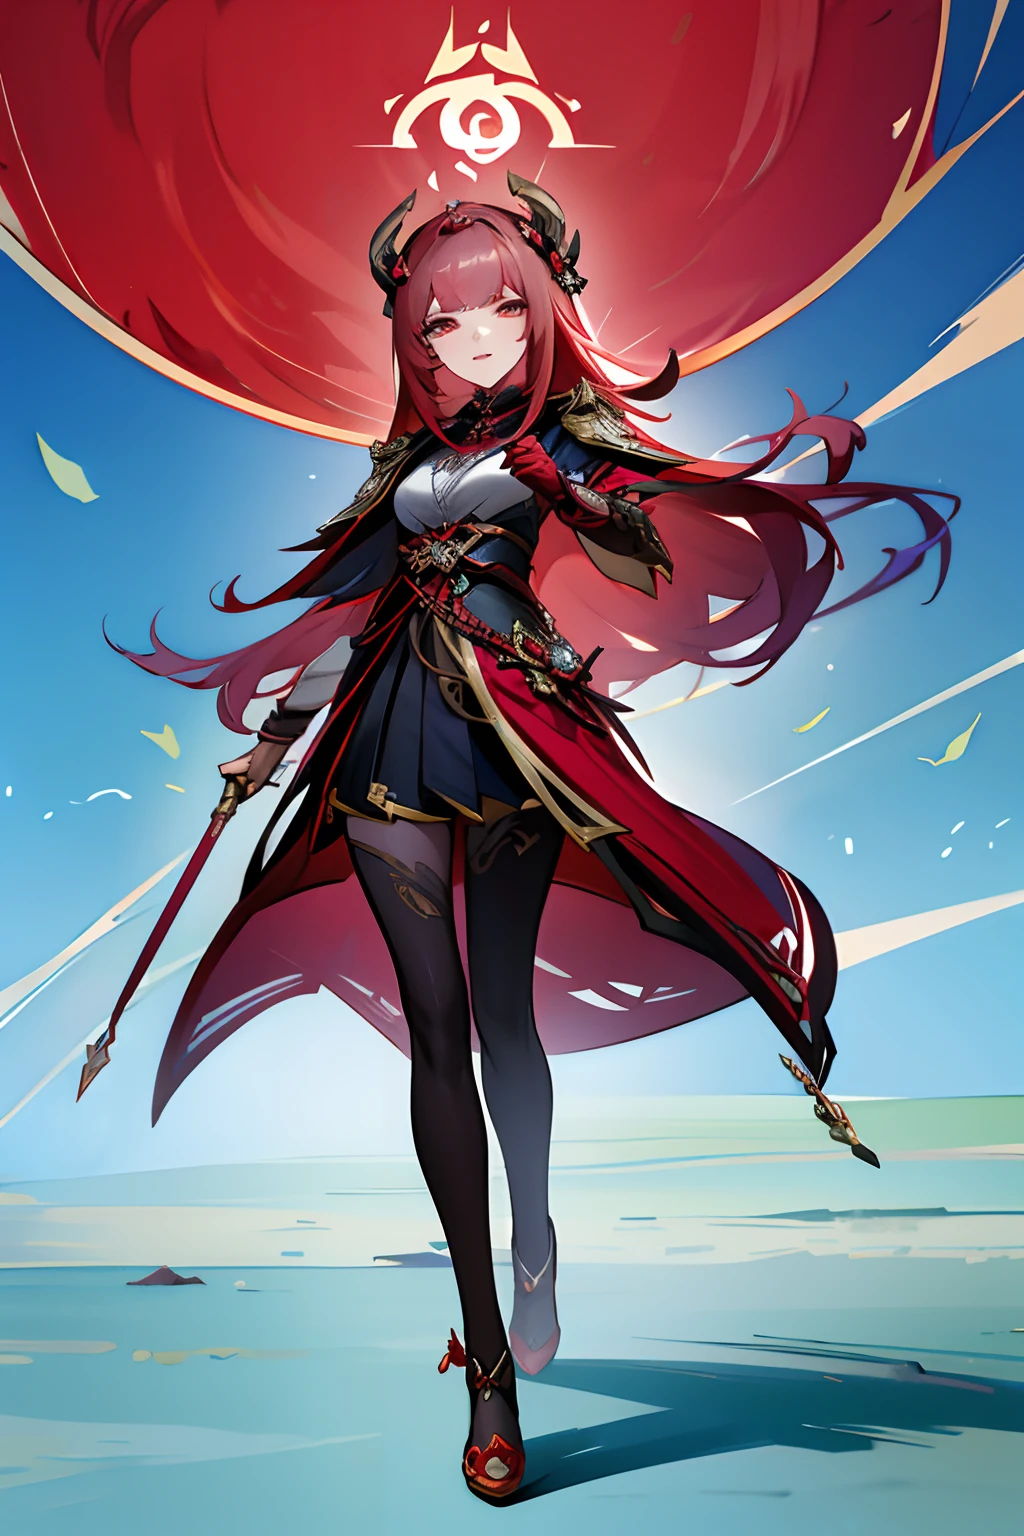 a woman with long red hair and horns walking in front of a blue background, keqing from genshin impact, ayaka genshin impact, ayaka game genshin impact, zhongli from genshin impact, genshin impact character, shadowverse style, cushart krenz key art feminine, full portrait of elementalist, portrait knights of zodiac girl, full body, standing full frontal, feet